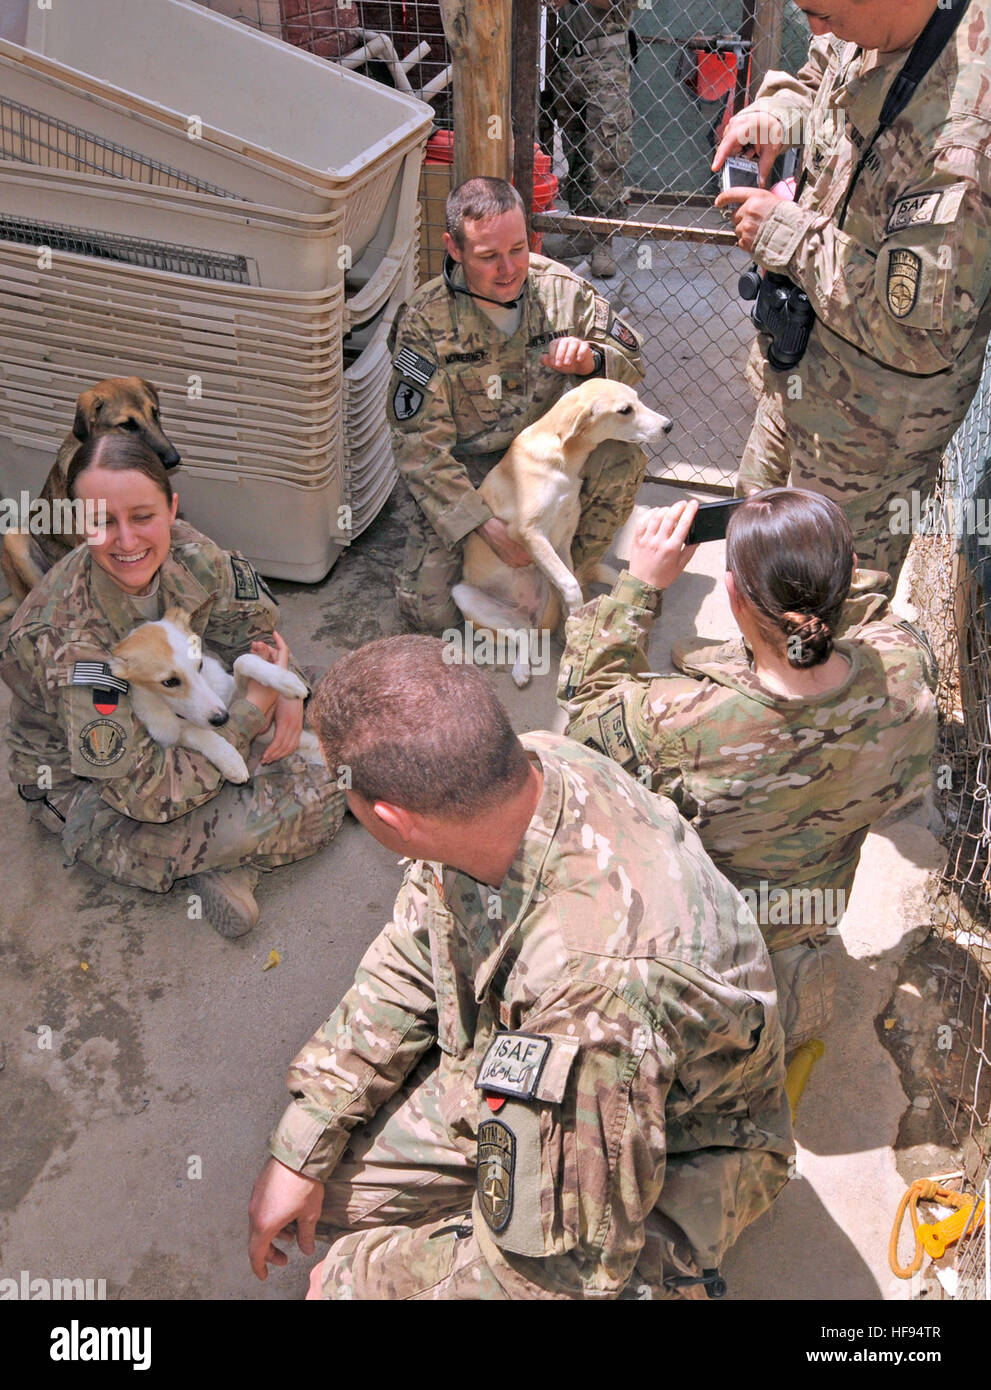 Camp Eggers volunteer community relations team members play with stray dogs at the PARSA social services compound in Kabul, Aug. 16. The visit was part of a volunteer mission to the co-located Afghan Scouts National Training Center, where volunteers delivered a truckload of donated flood relief supplies bound for the nearby Sarobi district. Recent flooding killed dozens and decimated communities in the mountainous district. The volunteers, representing civilians and service members from NATO Training Mission-Afghanistan/Combined Security Transition Command-Afghanistan are helping the Afghan Sc Stock Photo